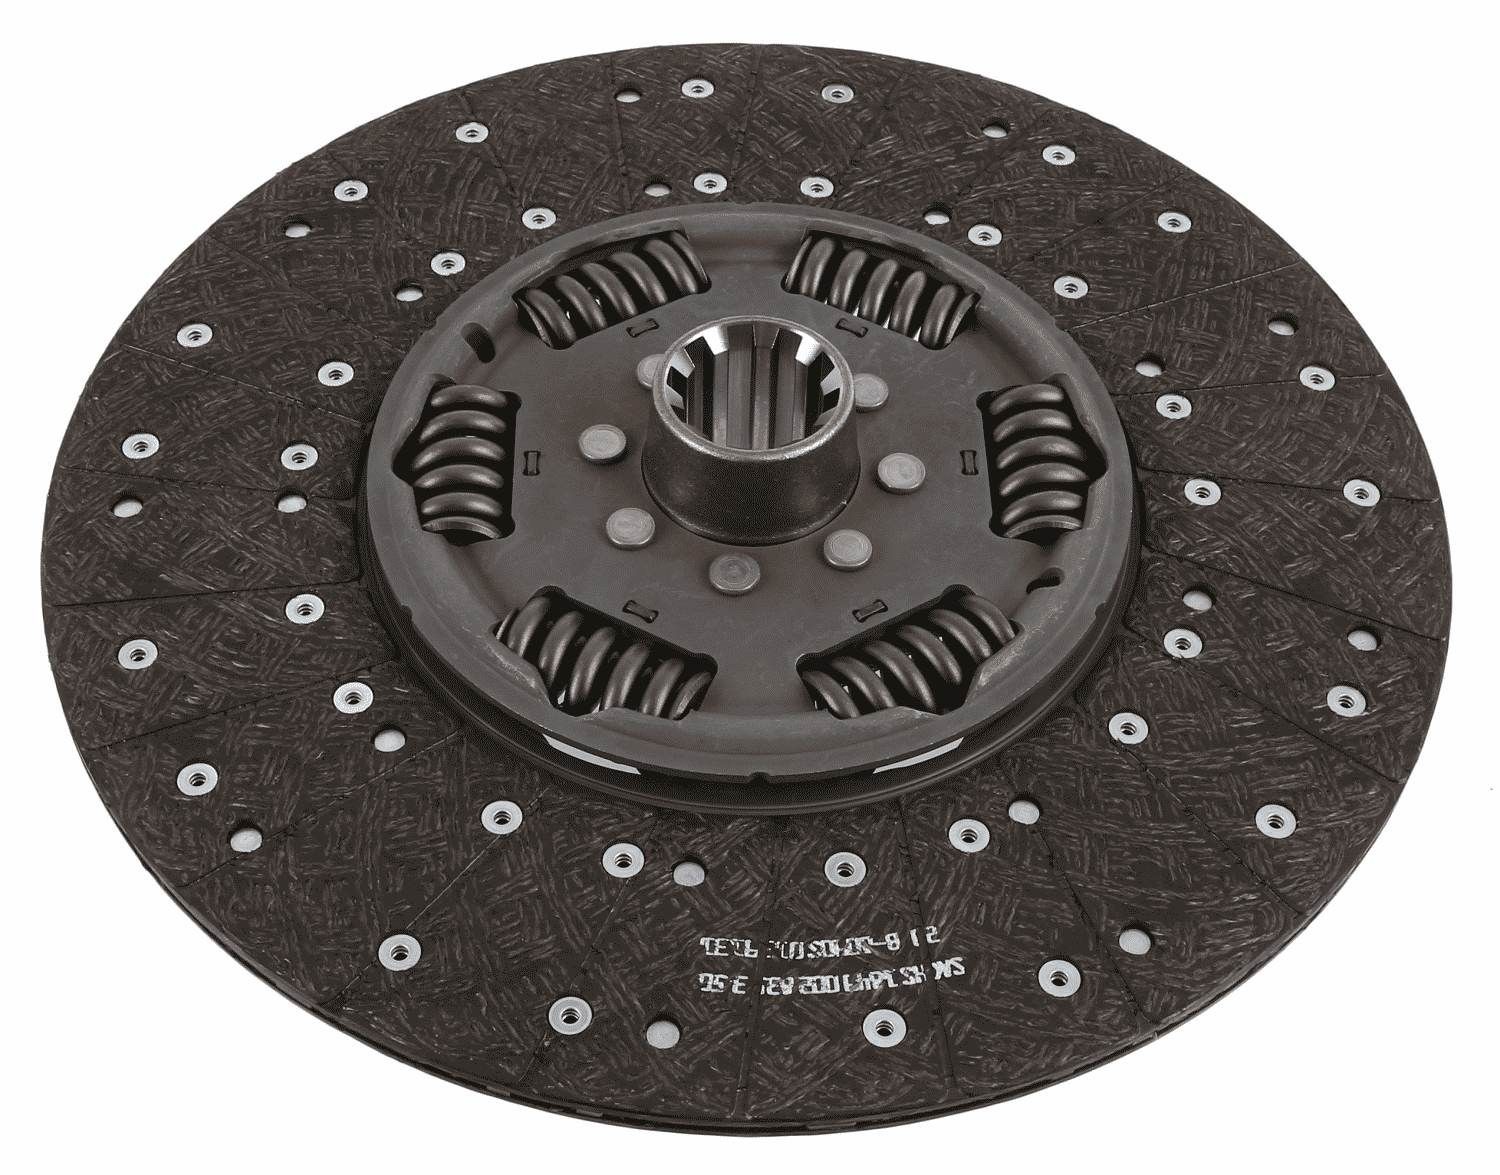 SACHS 1878 085 641 Clutch Disc 430mm, Number of Teeth: 10